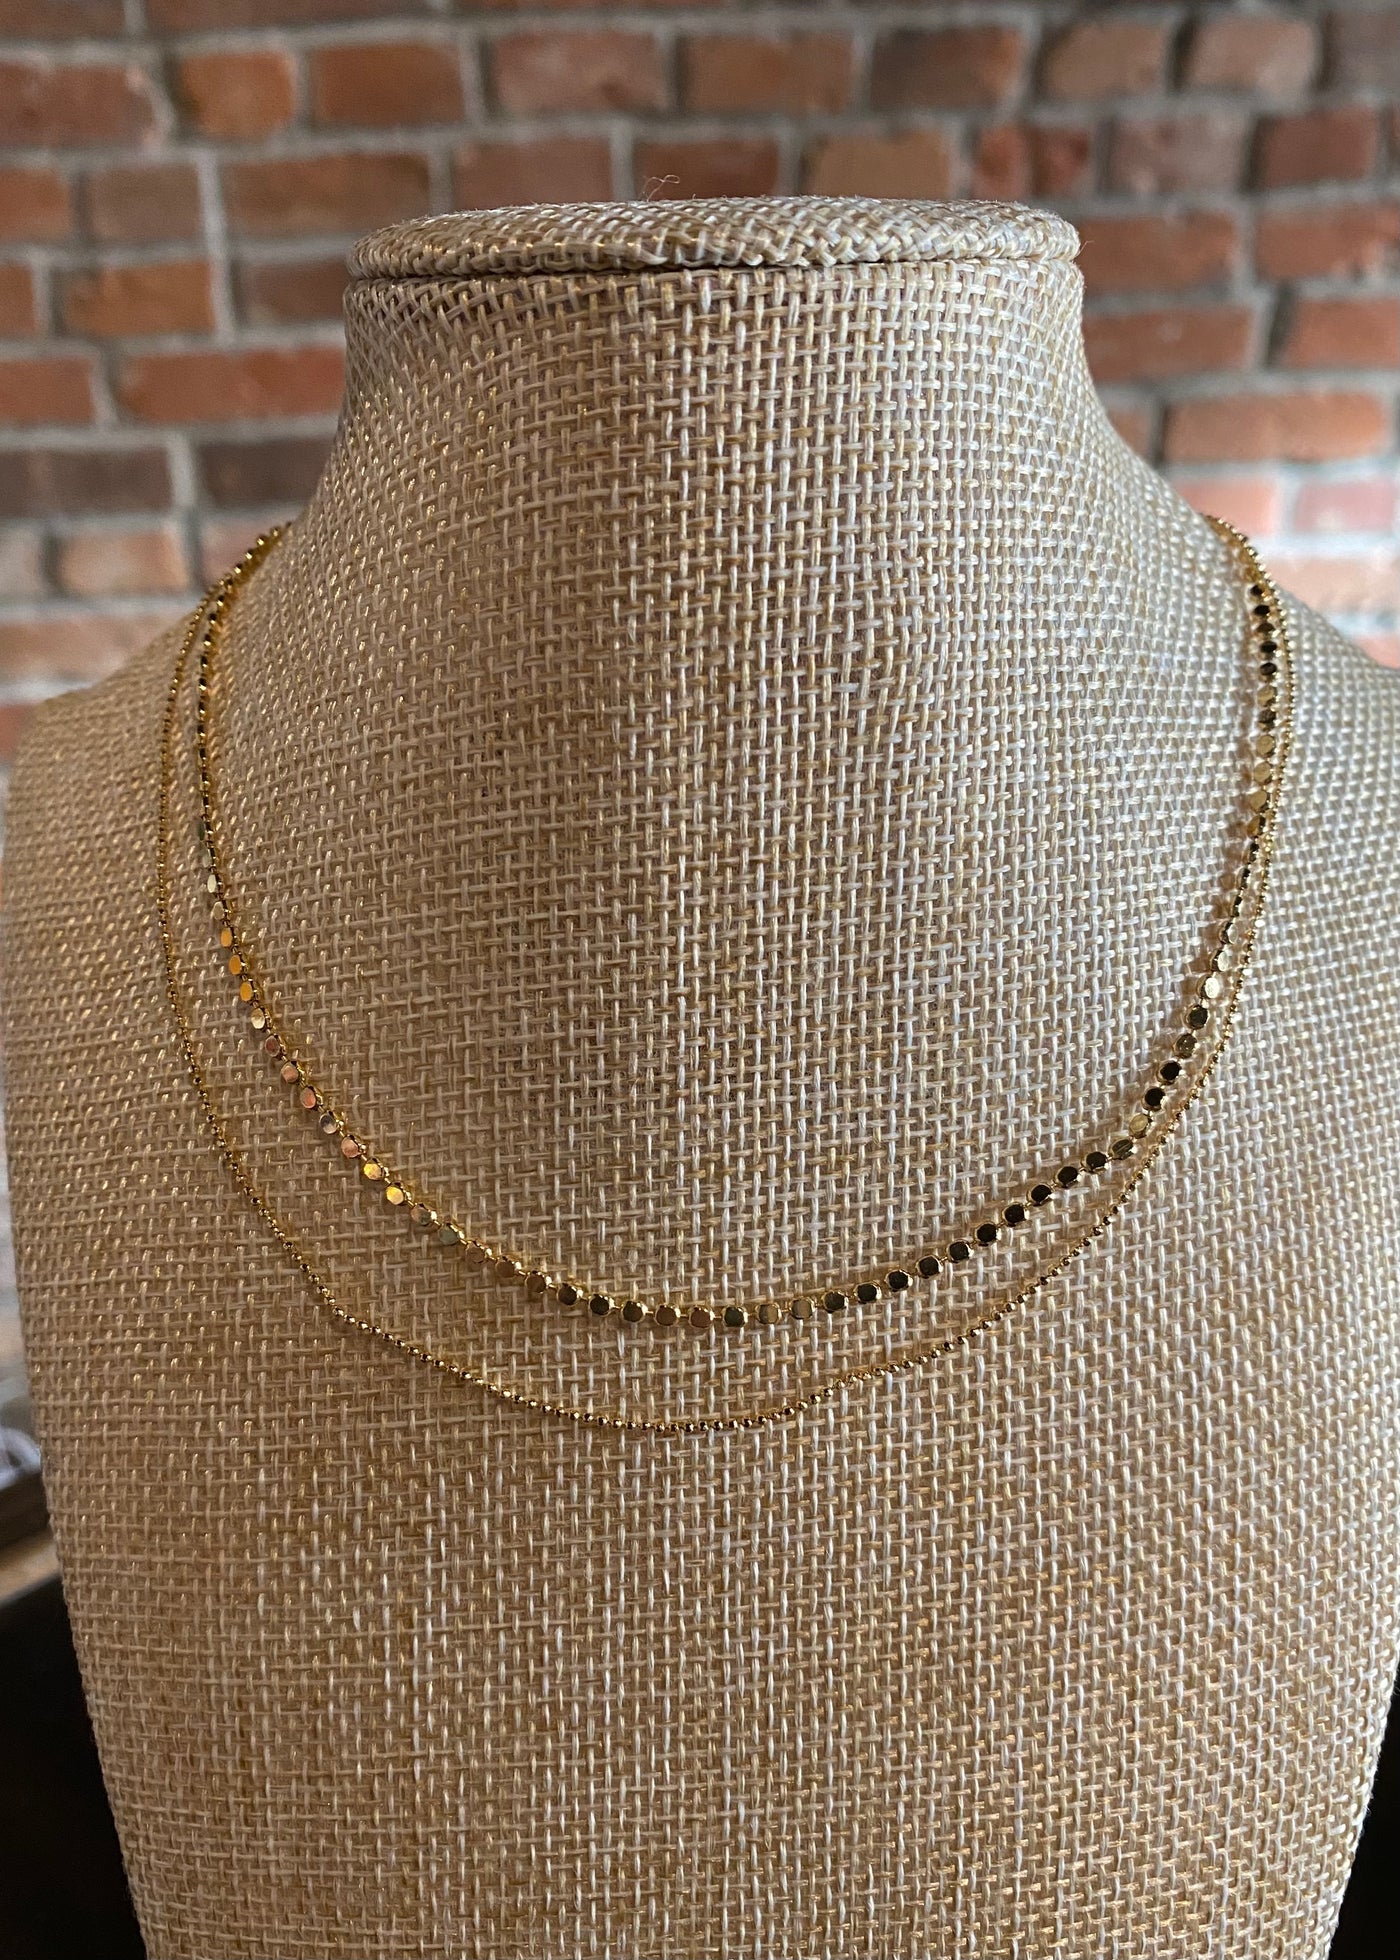 Layered Ball Chain Necklace